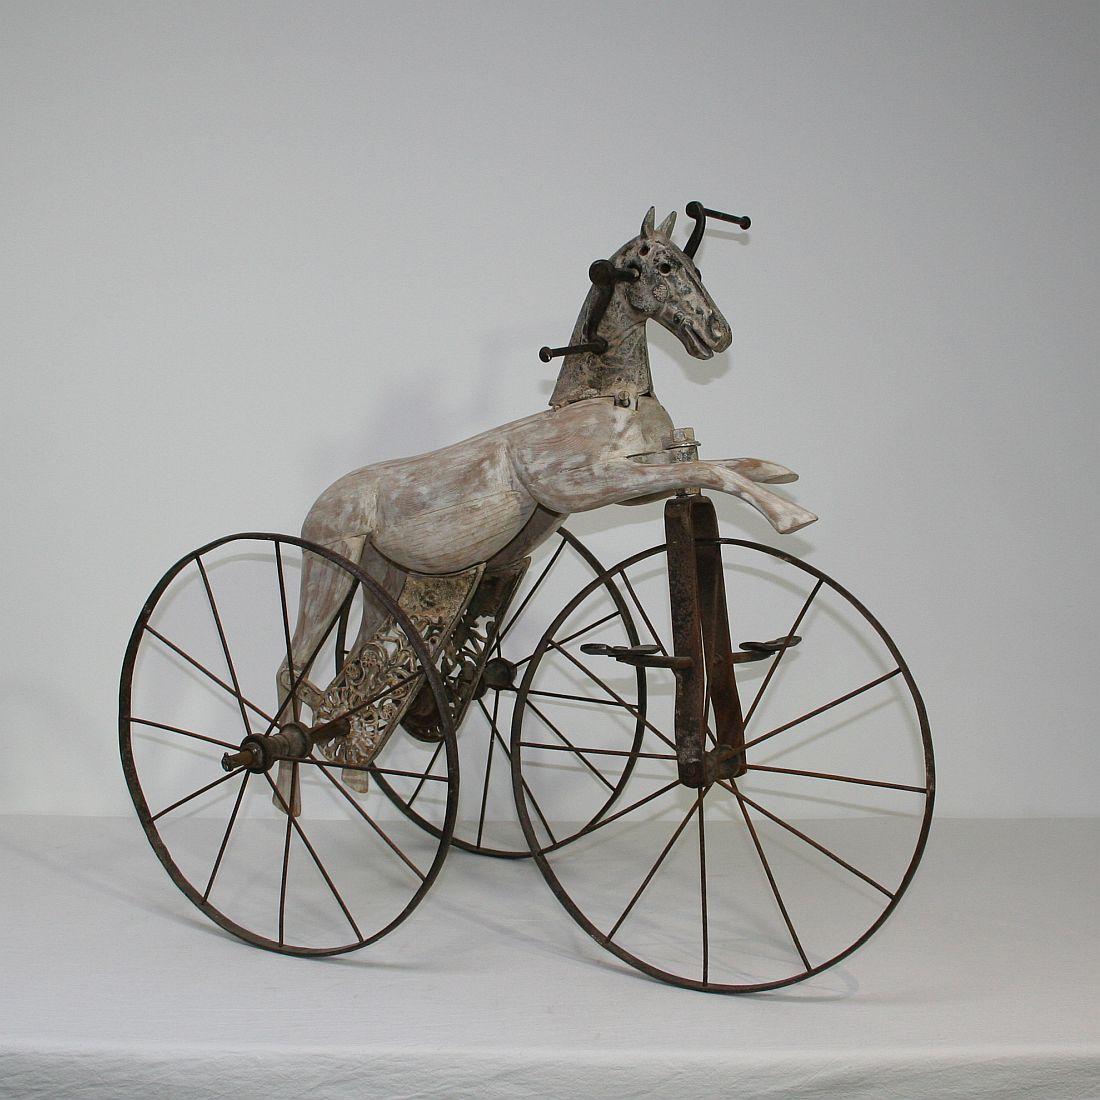 Beautiful and rare wooden tricycle horse with its cast iron details and stunning patina. 

This type of 19th century French velocipede tricycle horse was originally designed by Jean Louis Gourdoux of Paris between 1850 and 1910 which at the time